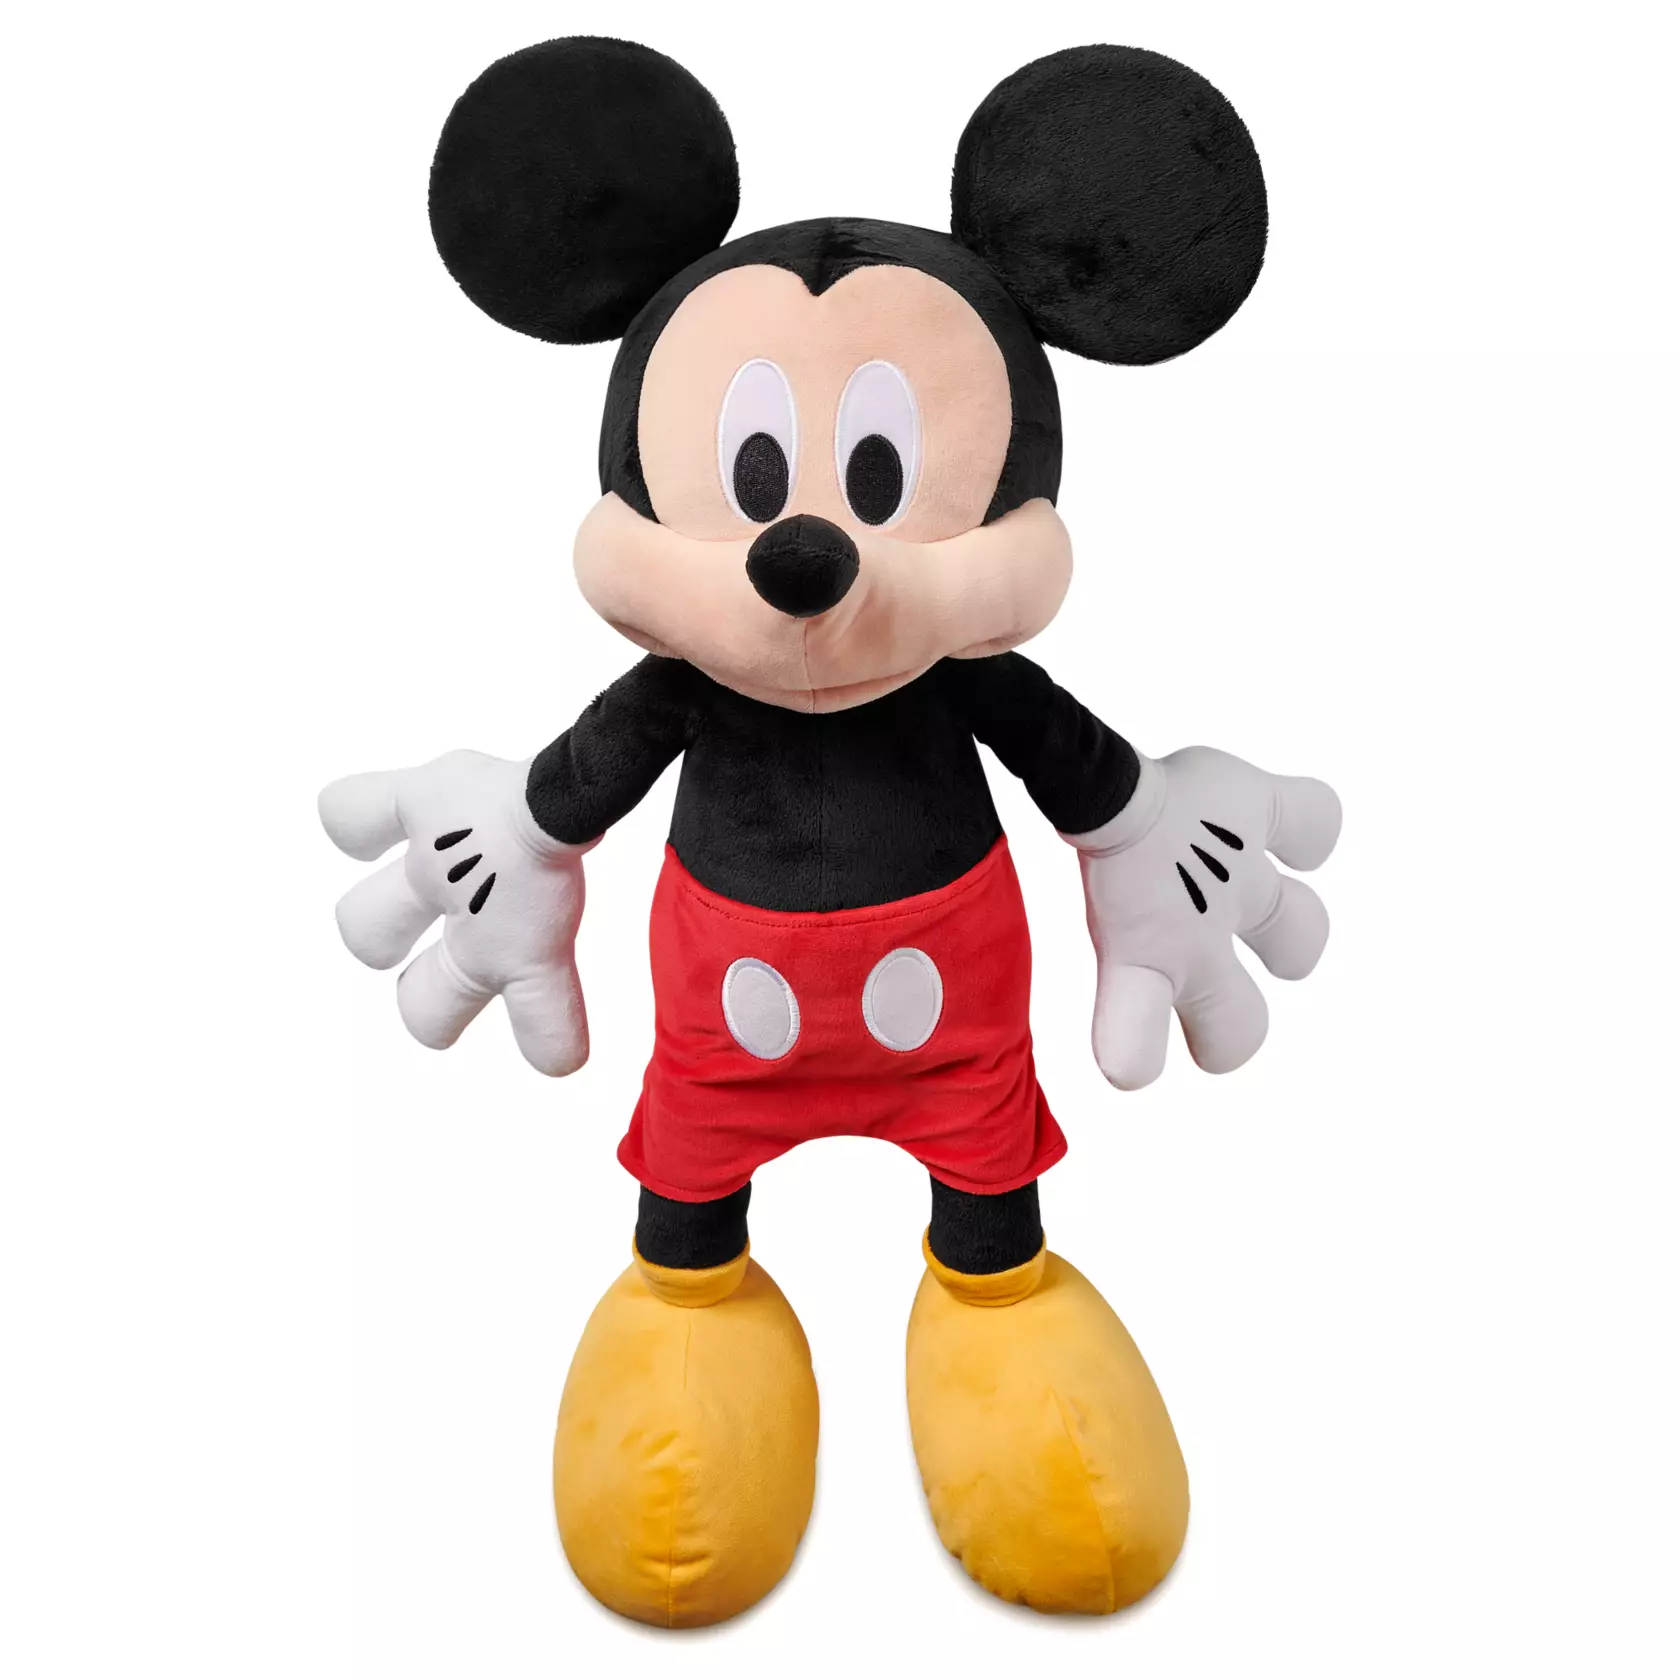 21 inch mickey mouse plush toy